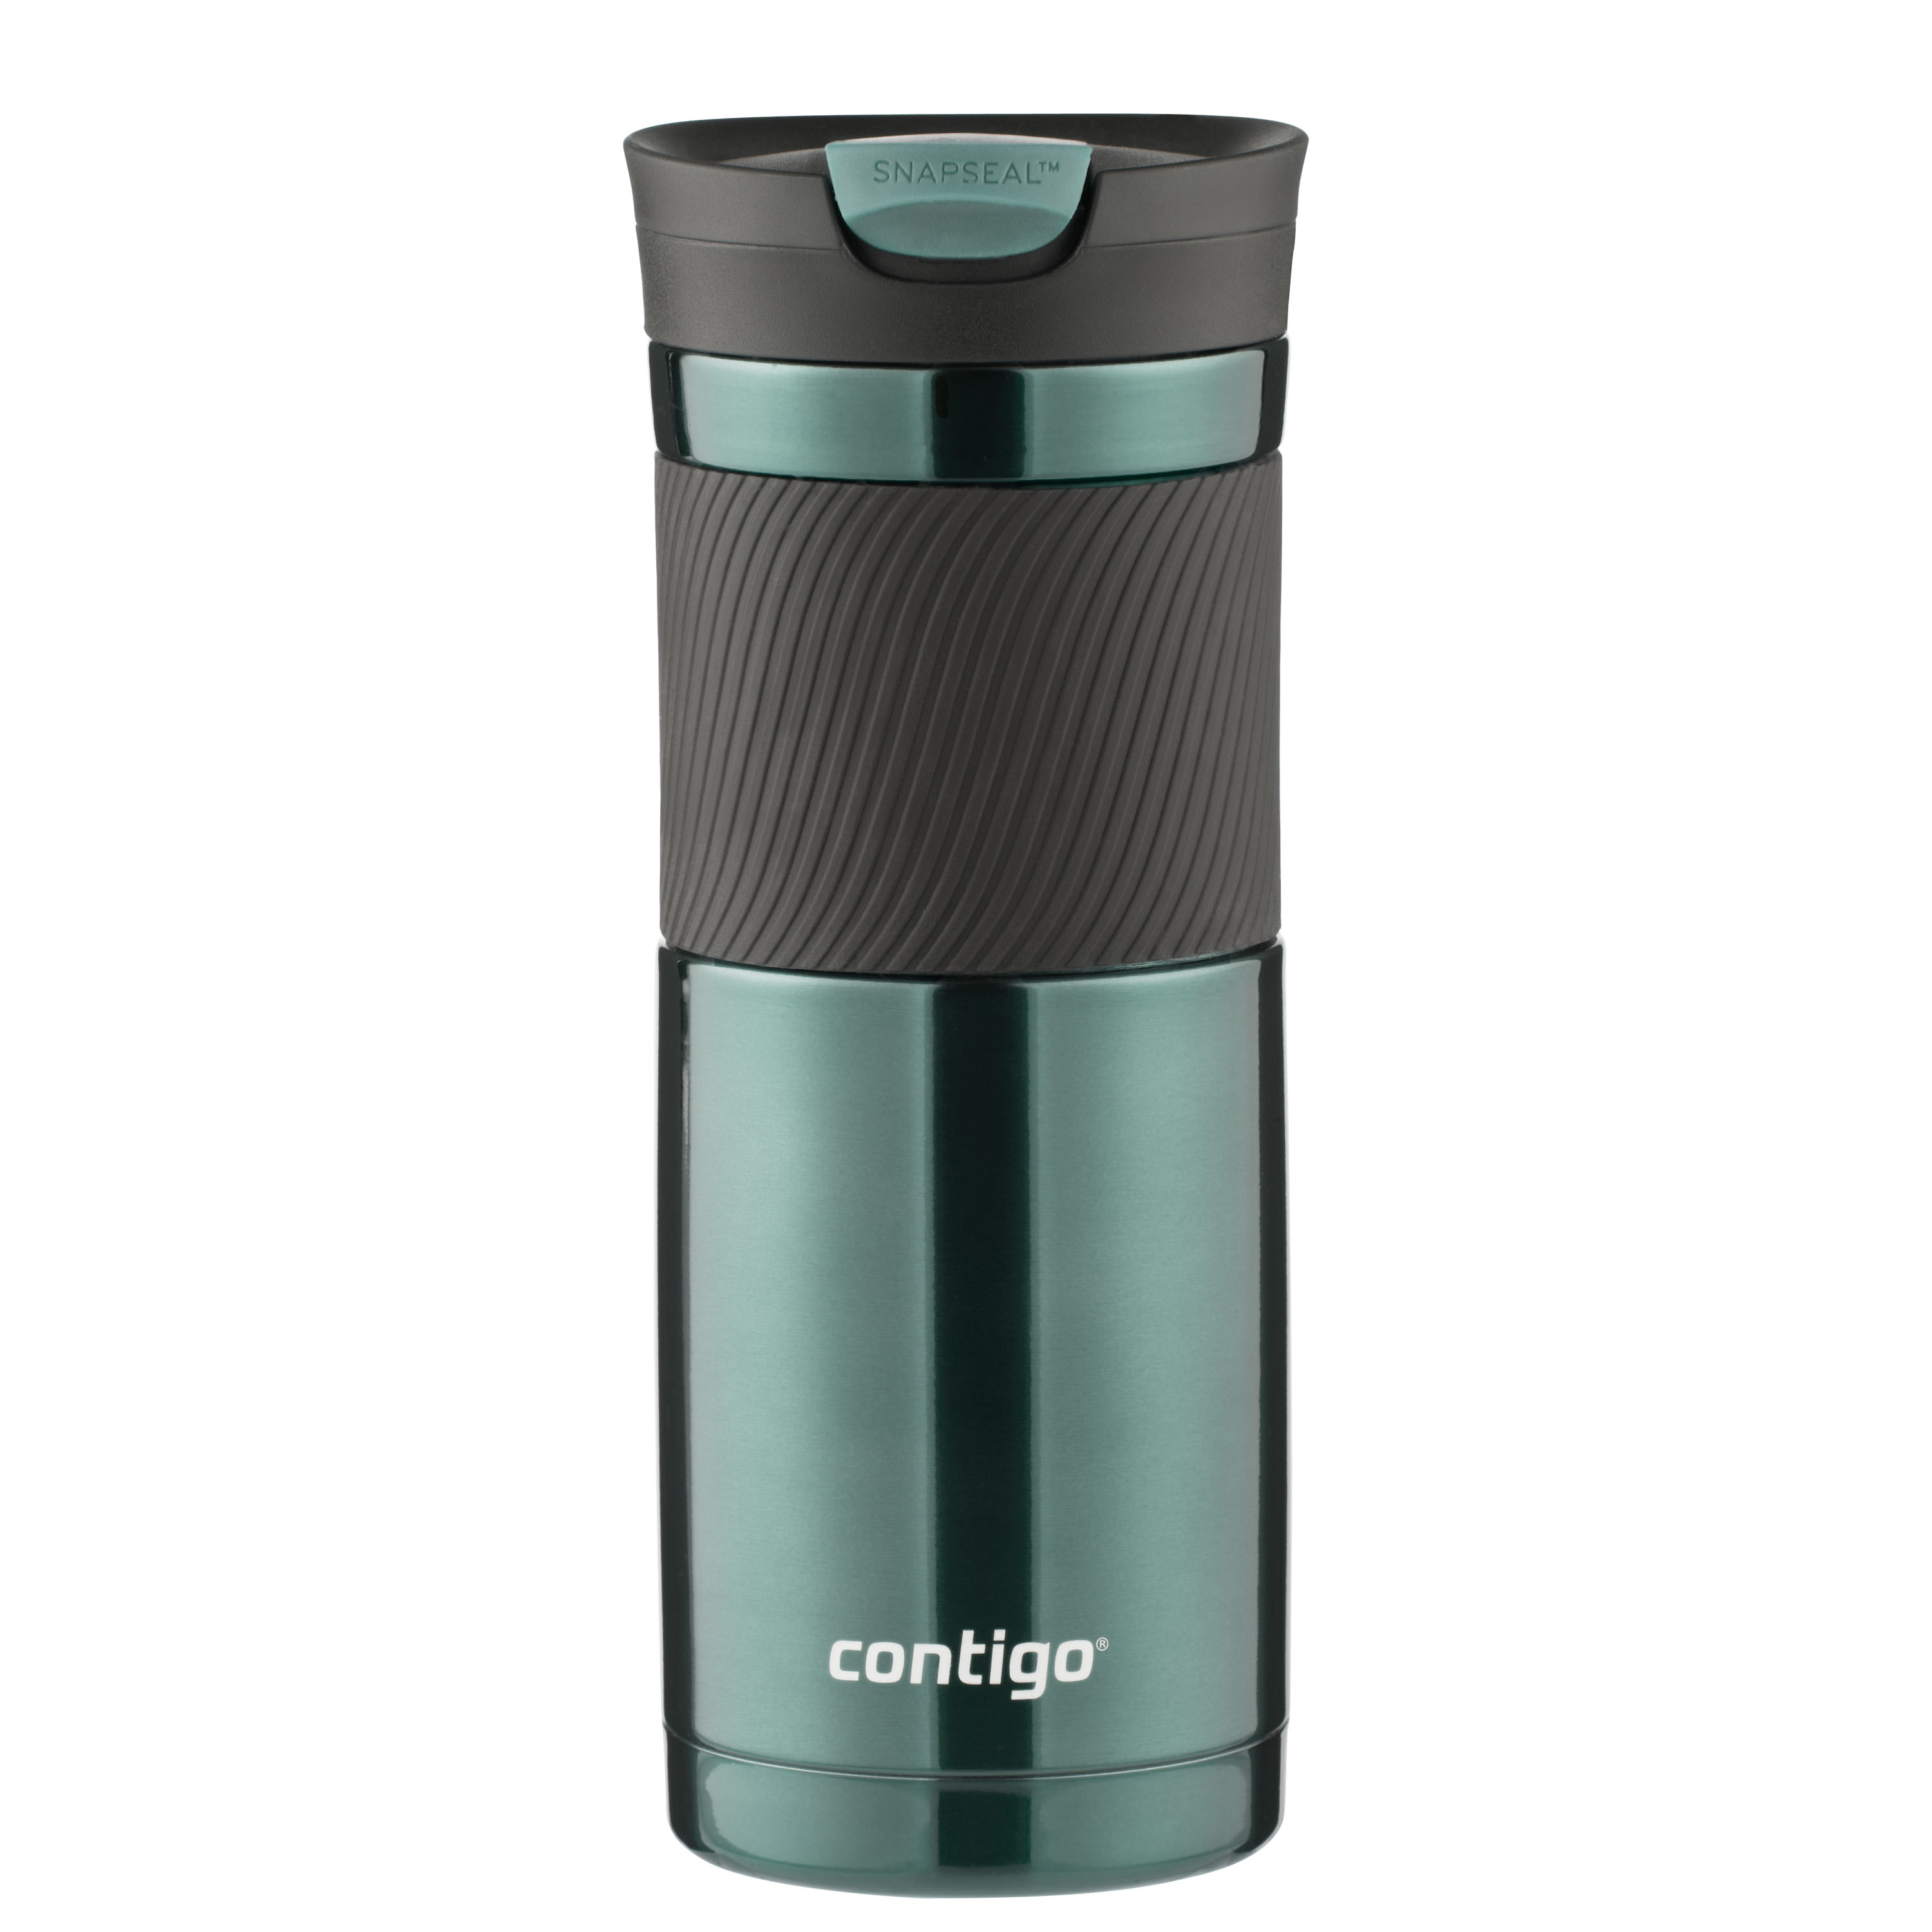 Contigo Byron Stainless Steel Travel Mug with SNAPSEAL Lid and Grip Grayed Jade, 20 fl oz. - image 4 of 5